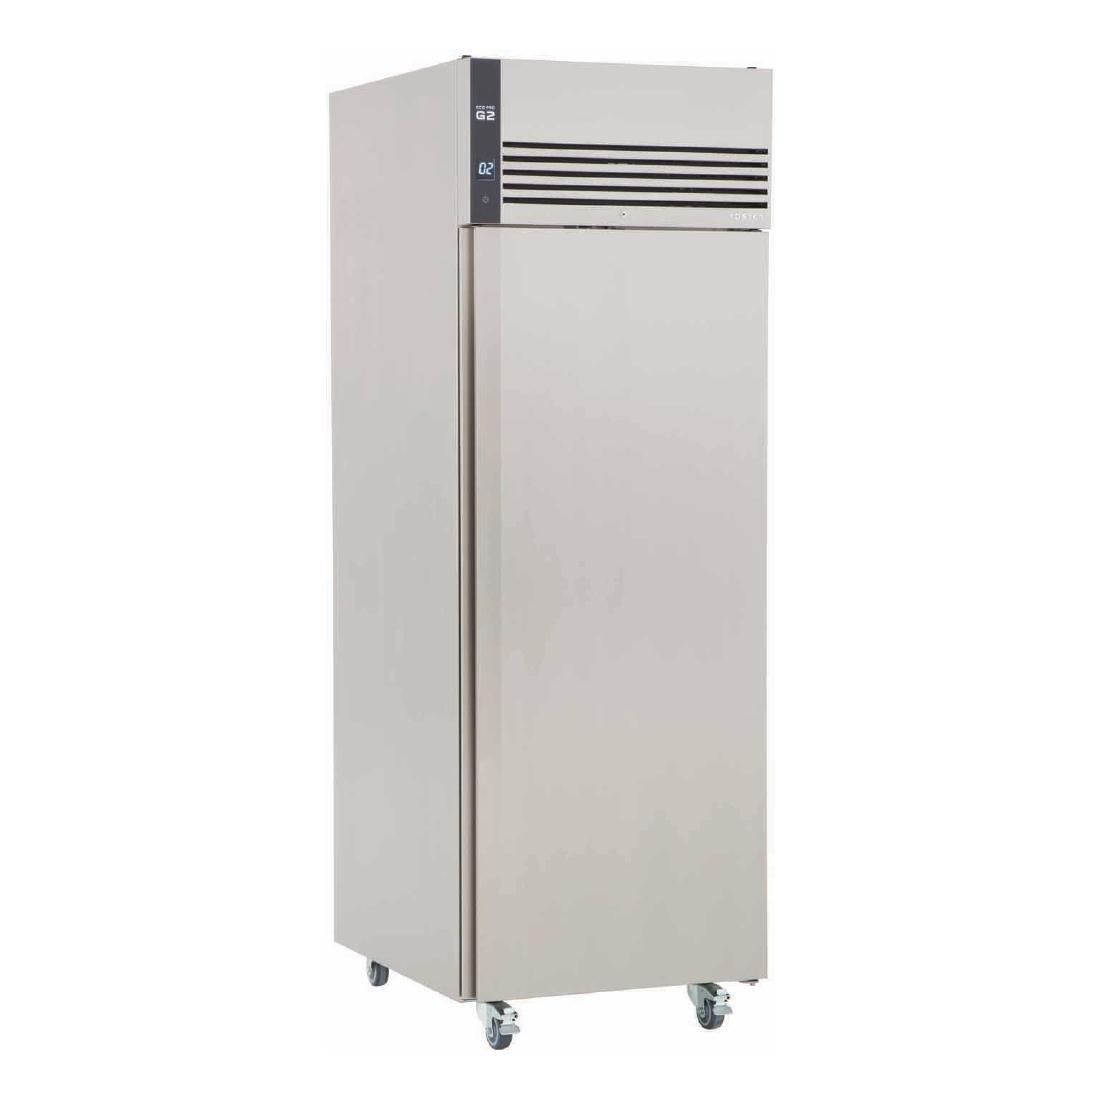 Foster EcoPro G2 1 Door 600Ltr Cabinet Fridge with Back EP700H 10/113